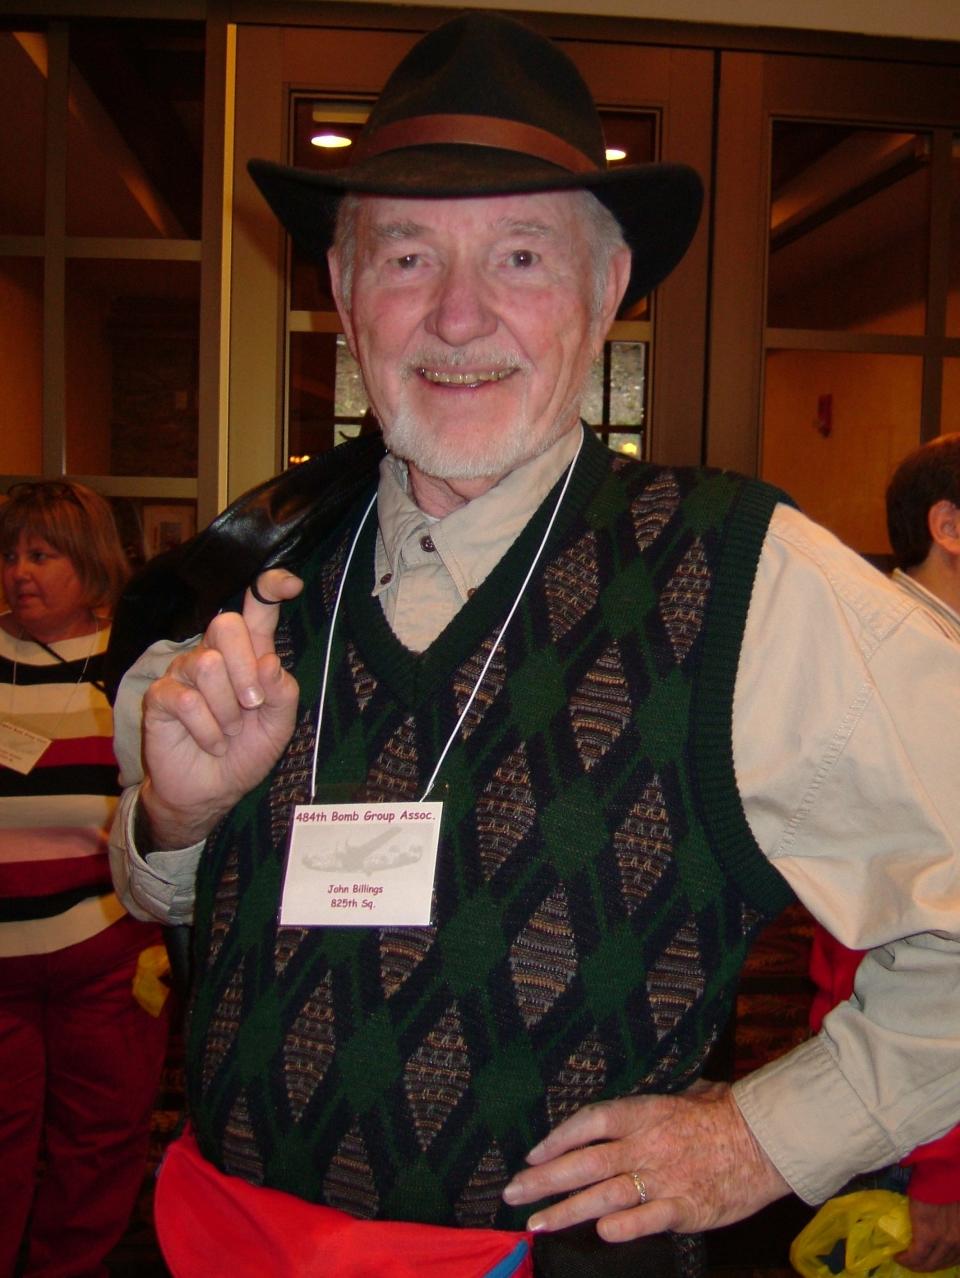 John Billings in 2013 while attending a World War II reunion of the 484th Bombardment Group in Omaha, Nebraska.